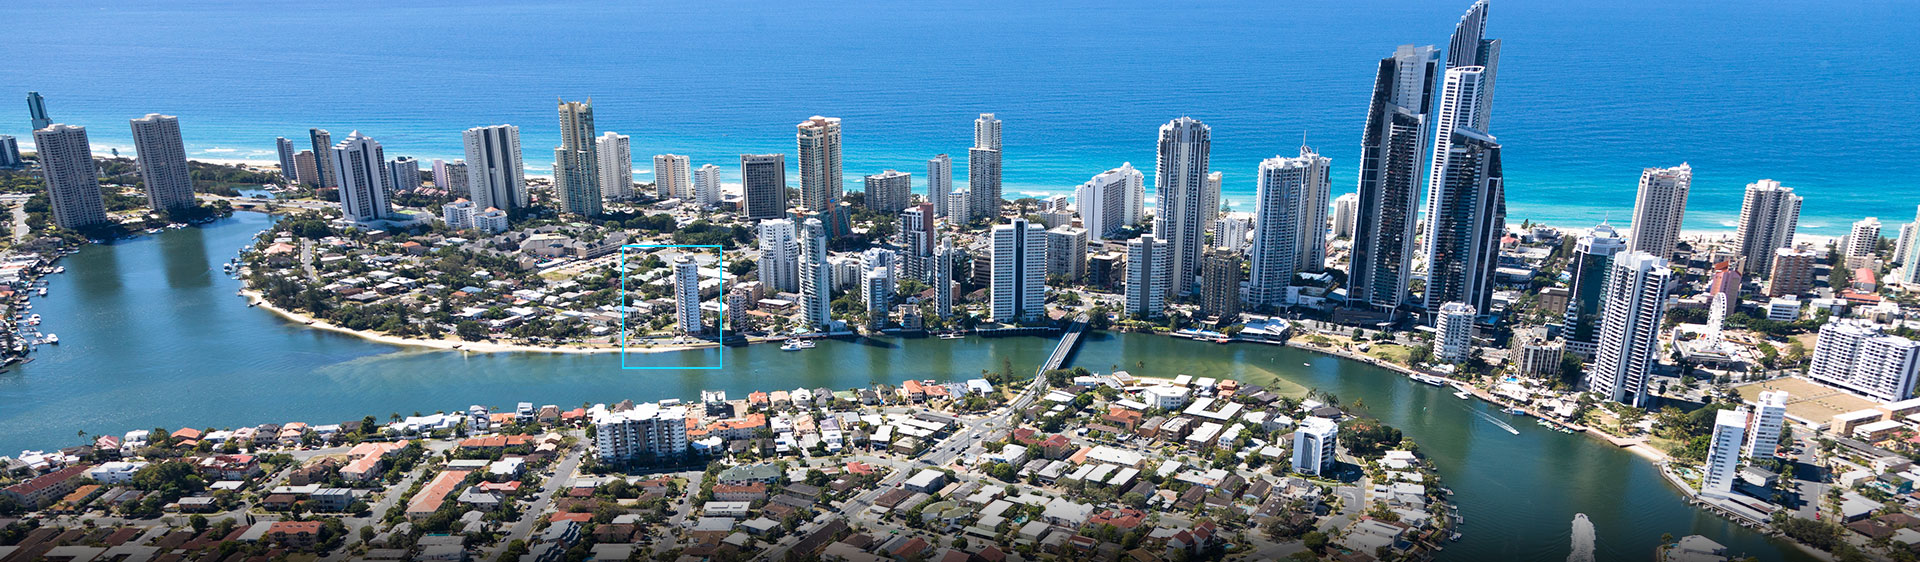 1920x562 > Surfers Paradise Wallpapers